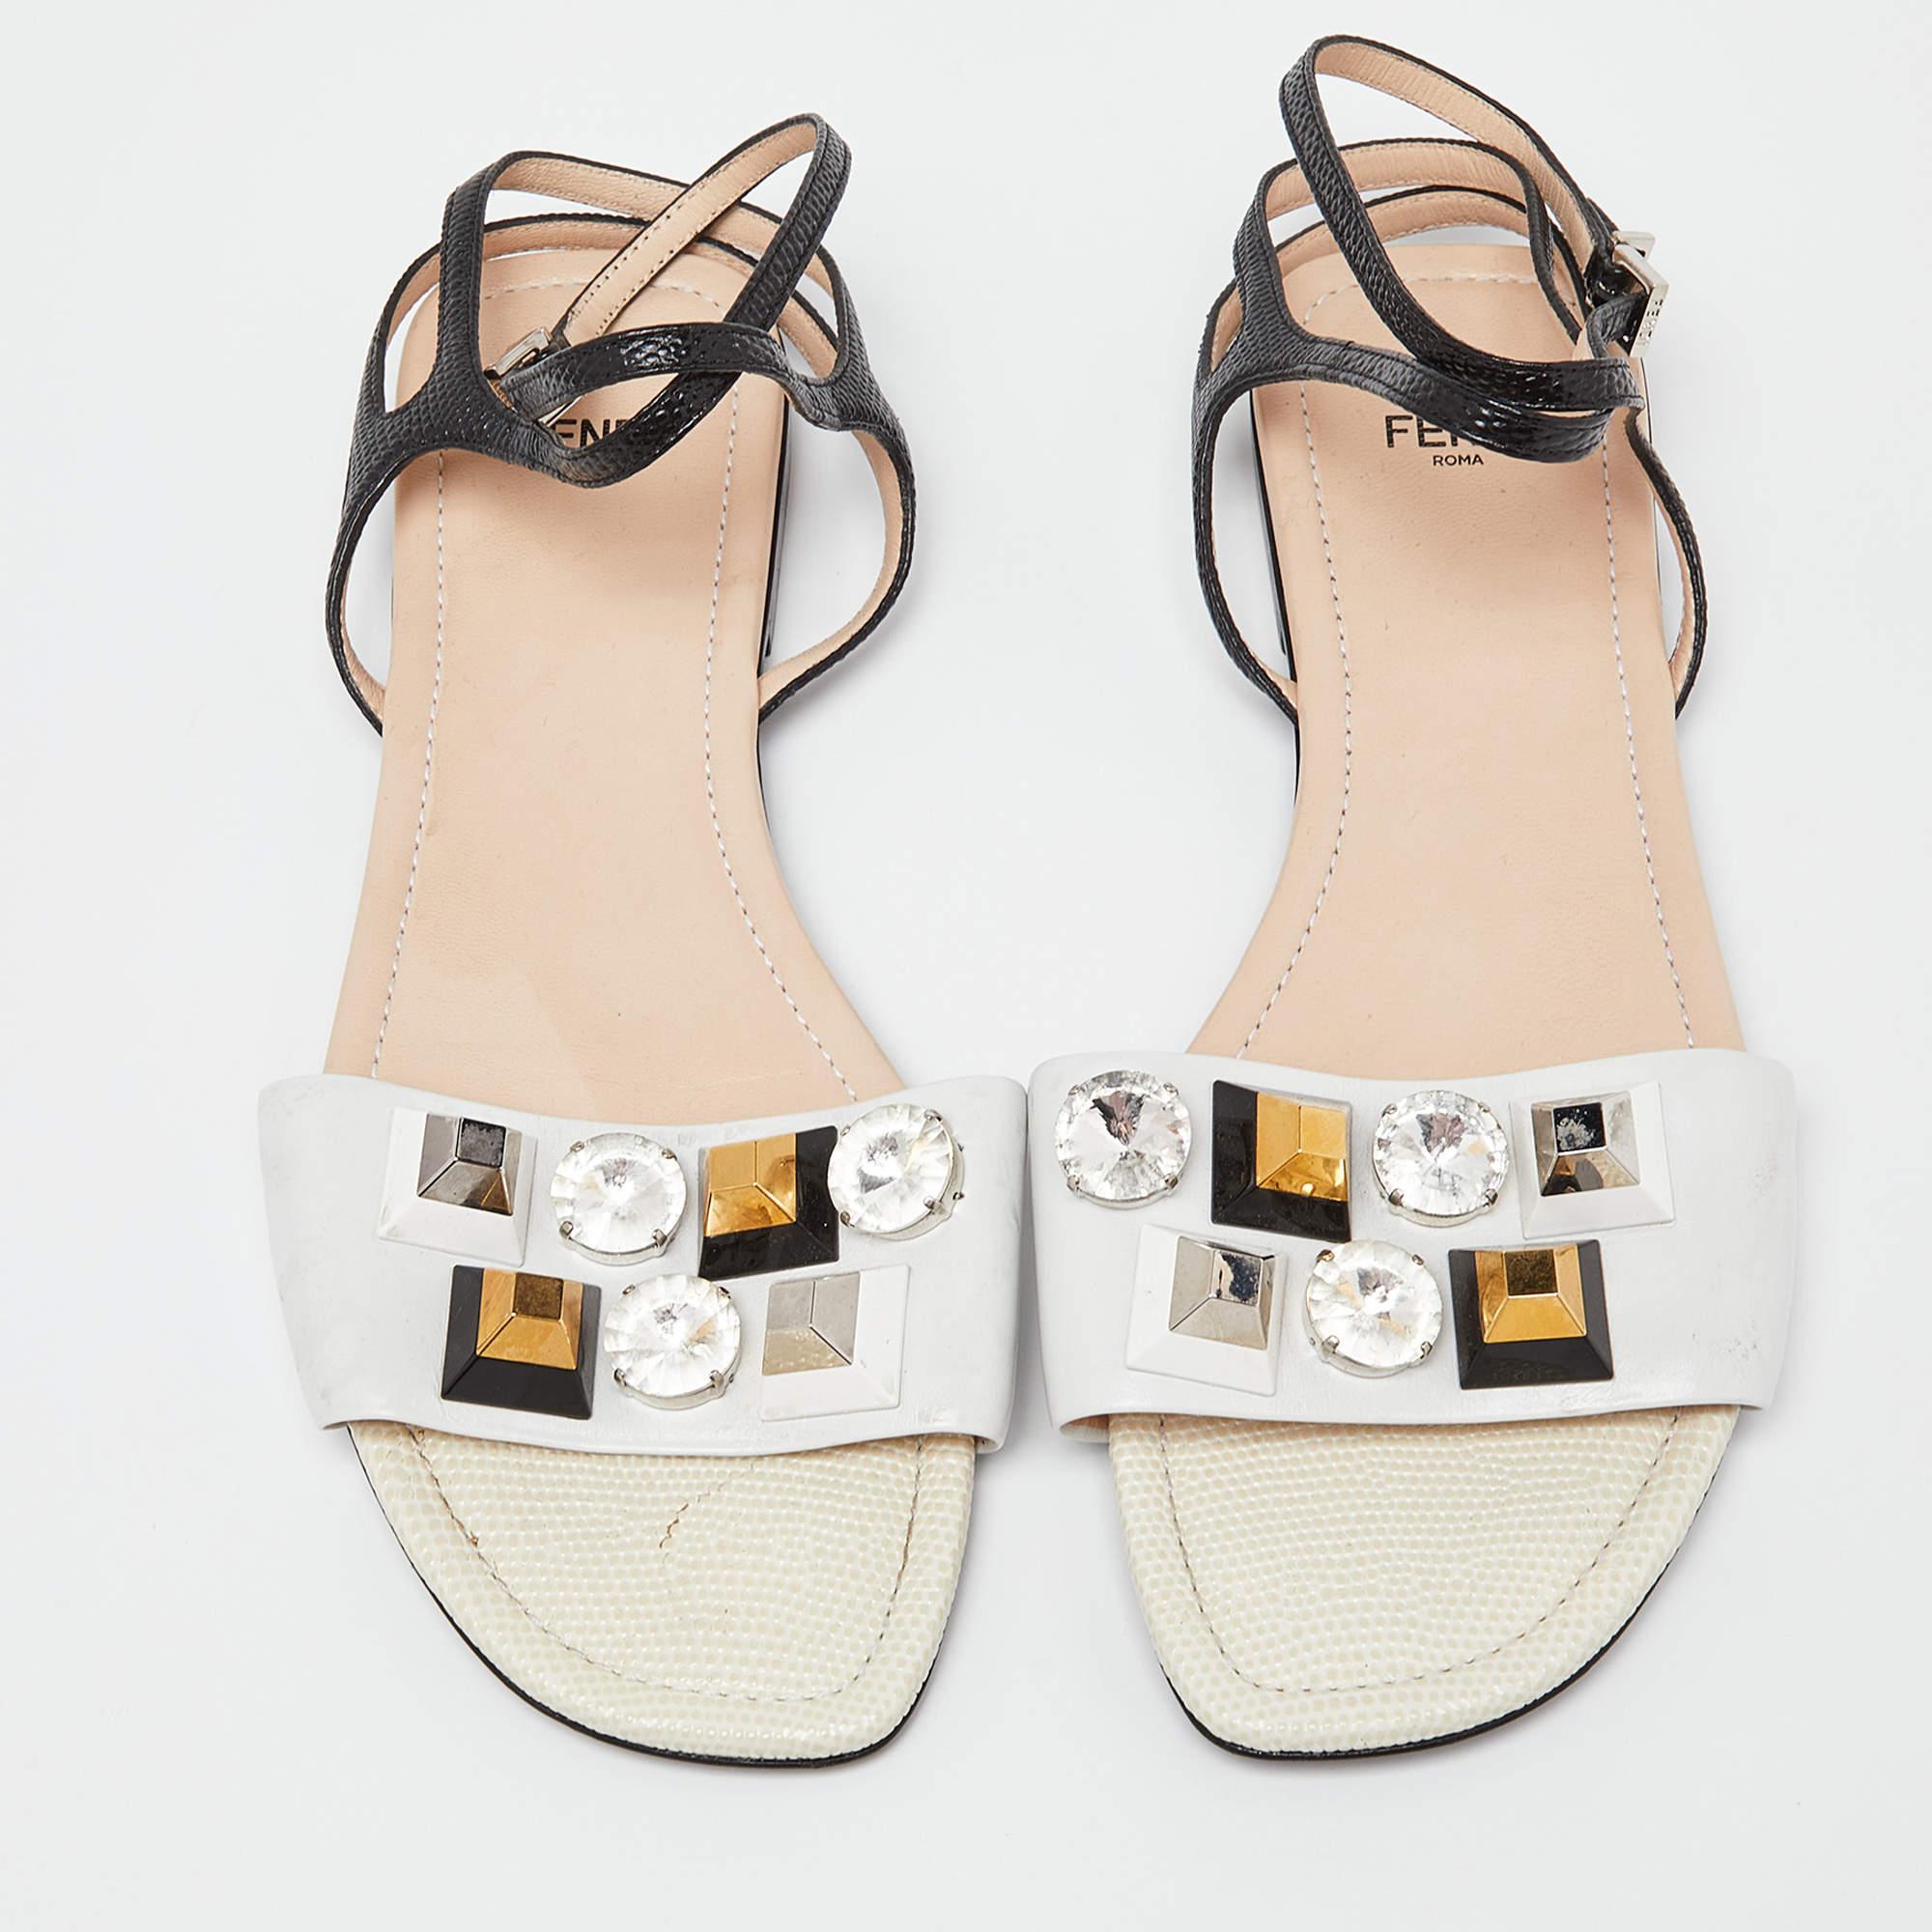 Fendi Tri Color Studded Leather and Lizard Embossed Flat Ankle Strap Sandals  In Good Condition For Sale In Dubai, Al Qouz 2